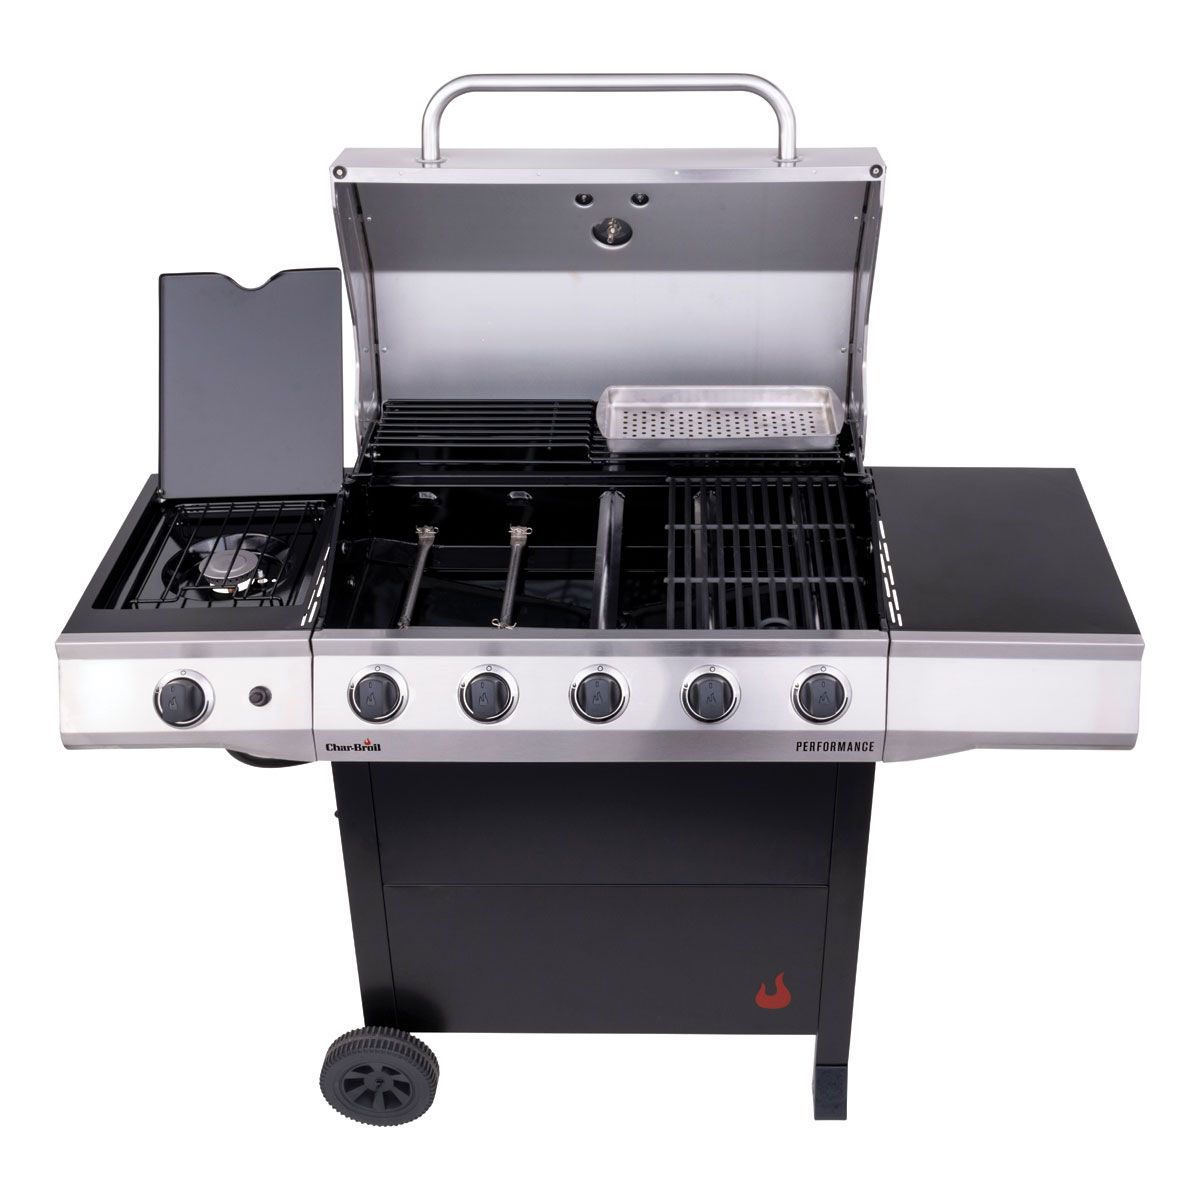 CHAR-BROIL GRILL Badcock Home Furniture &more